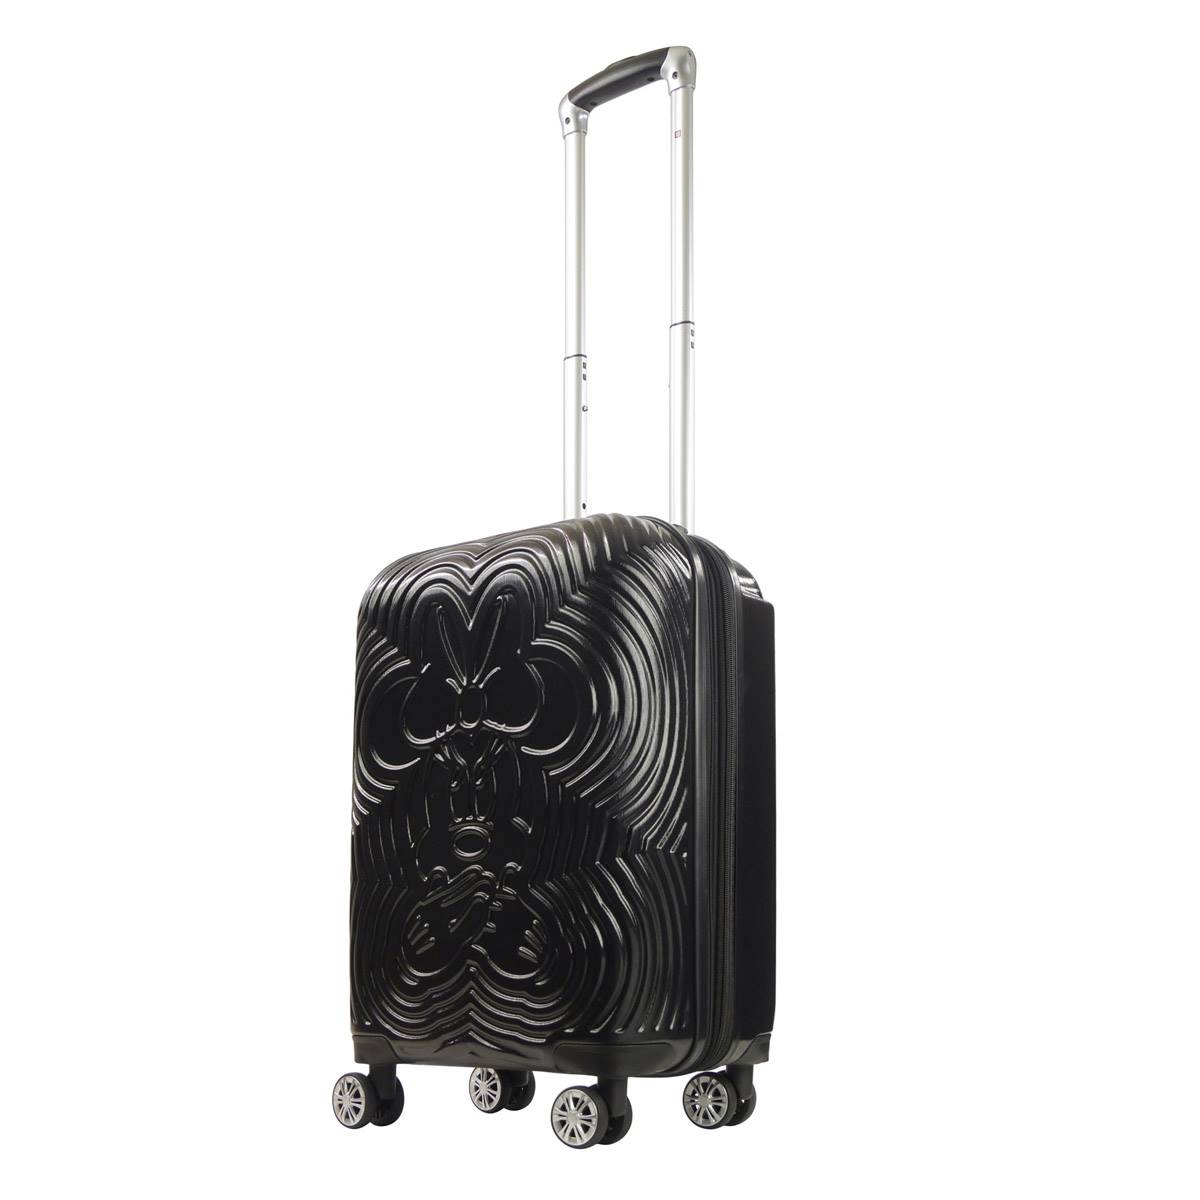 FUL Playful Minnie Mouse 21in. Hardside Carry-On Spinner Luggage